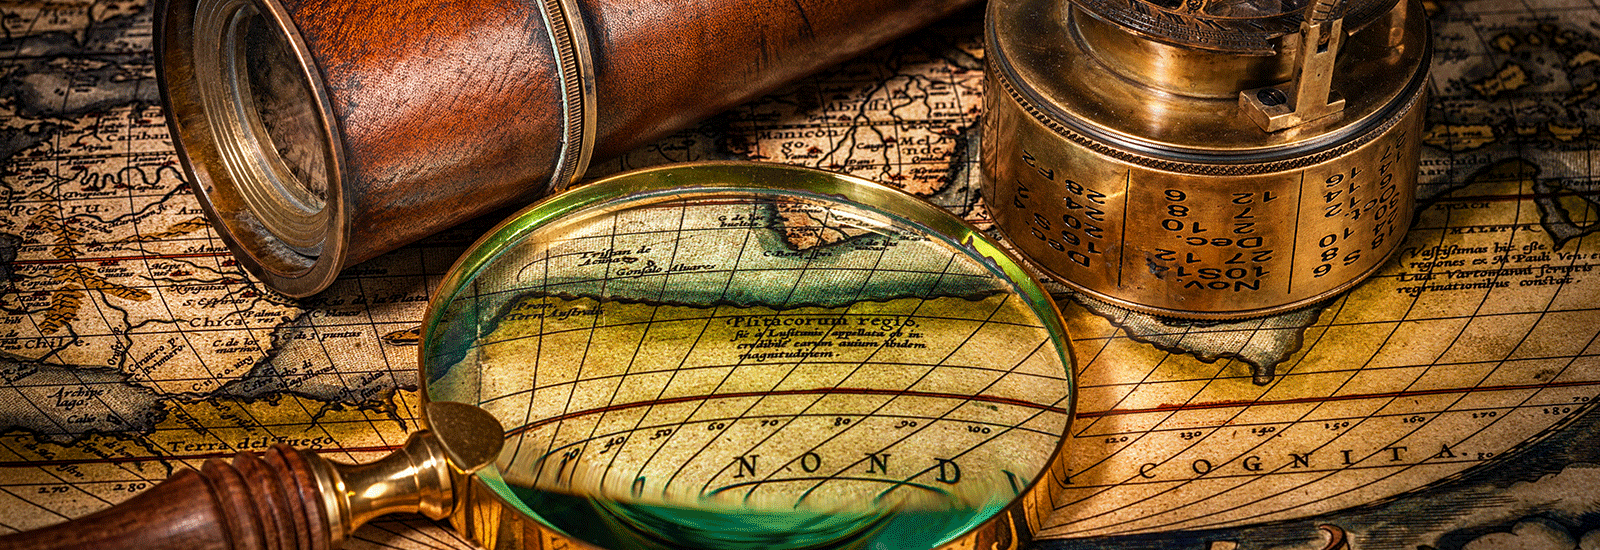 antique map with antique spy glass, compass and magnifying glass laying on top of it